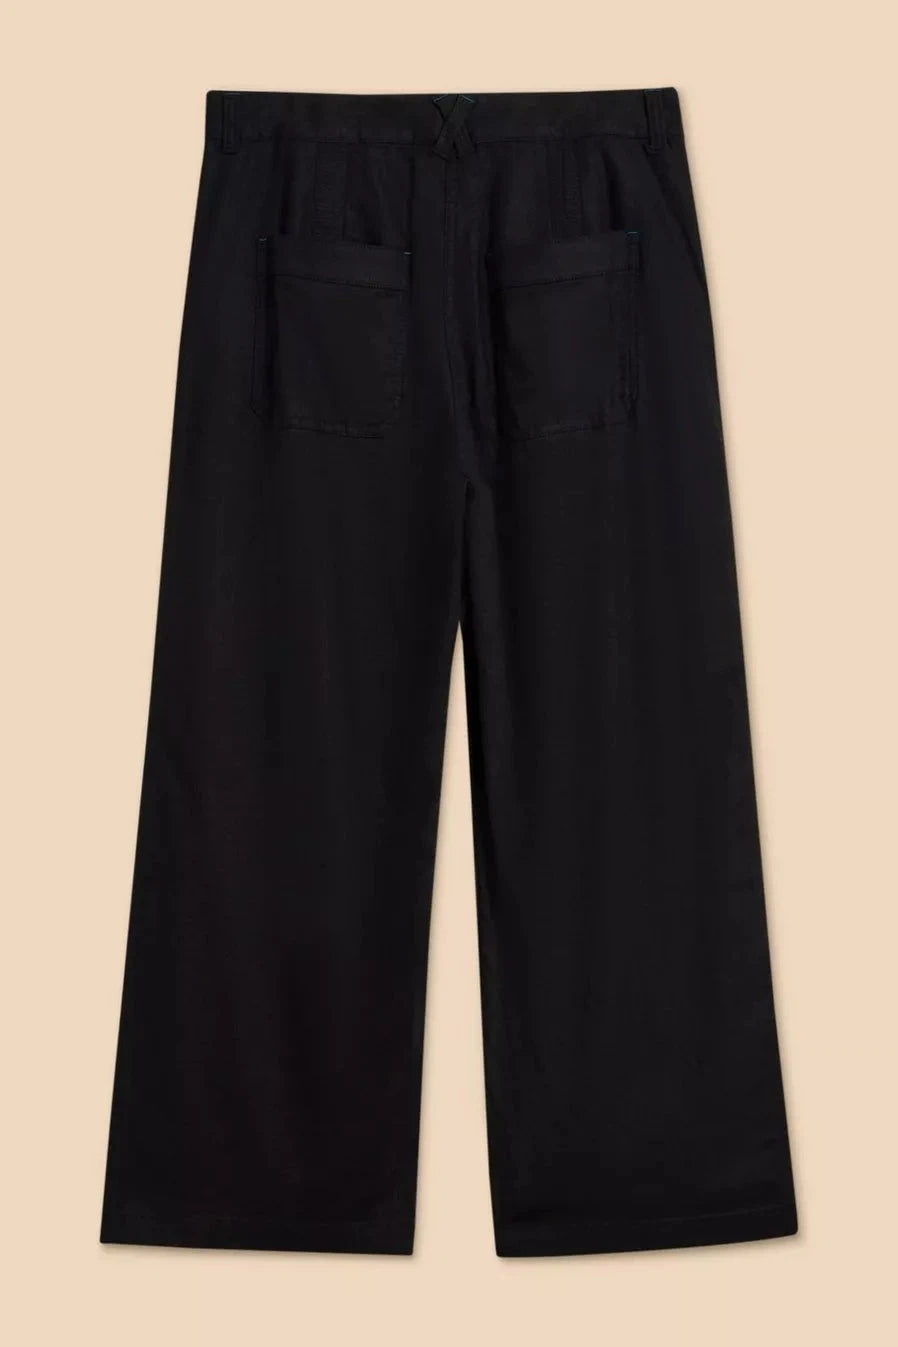 White Stuff Harper Linen Blend Trouser in Pure Black-Womens-Ohh! By Gum - Shop Sustainable